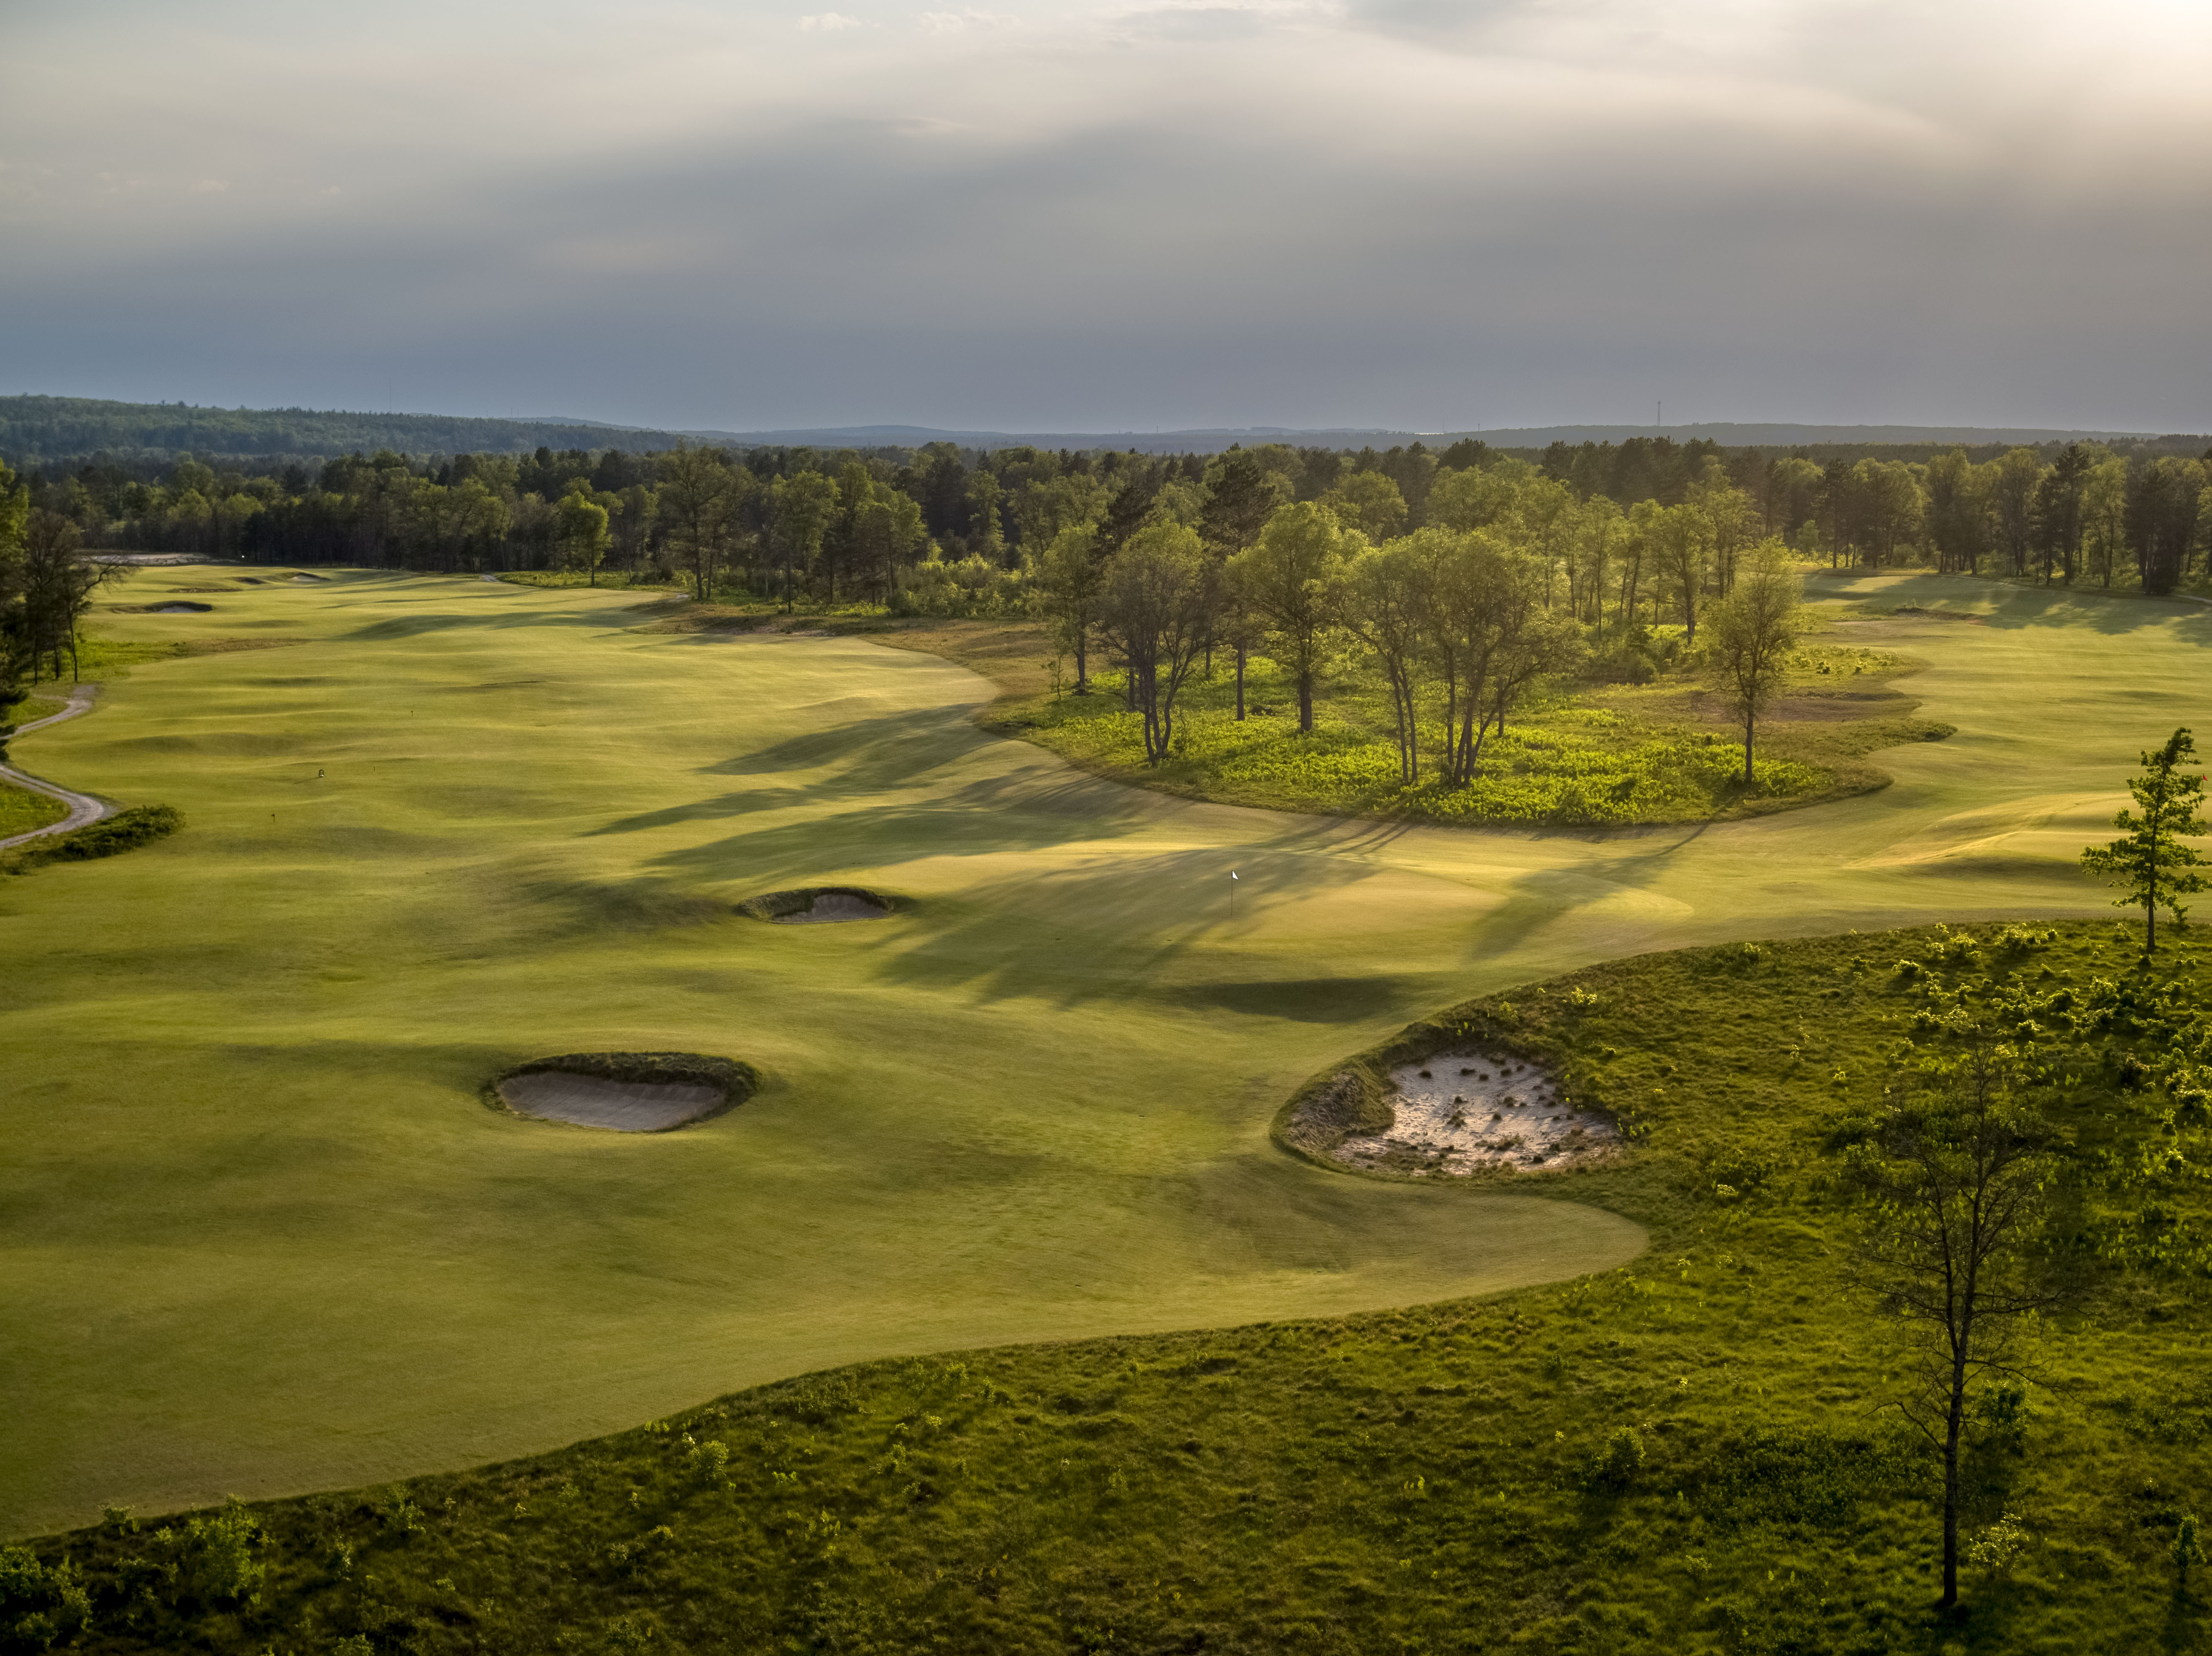 The Loop Black Course at Forest Dunes | Courses | GolfDigest.com